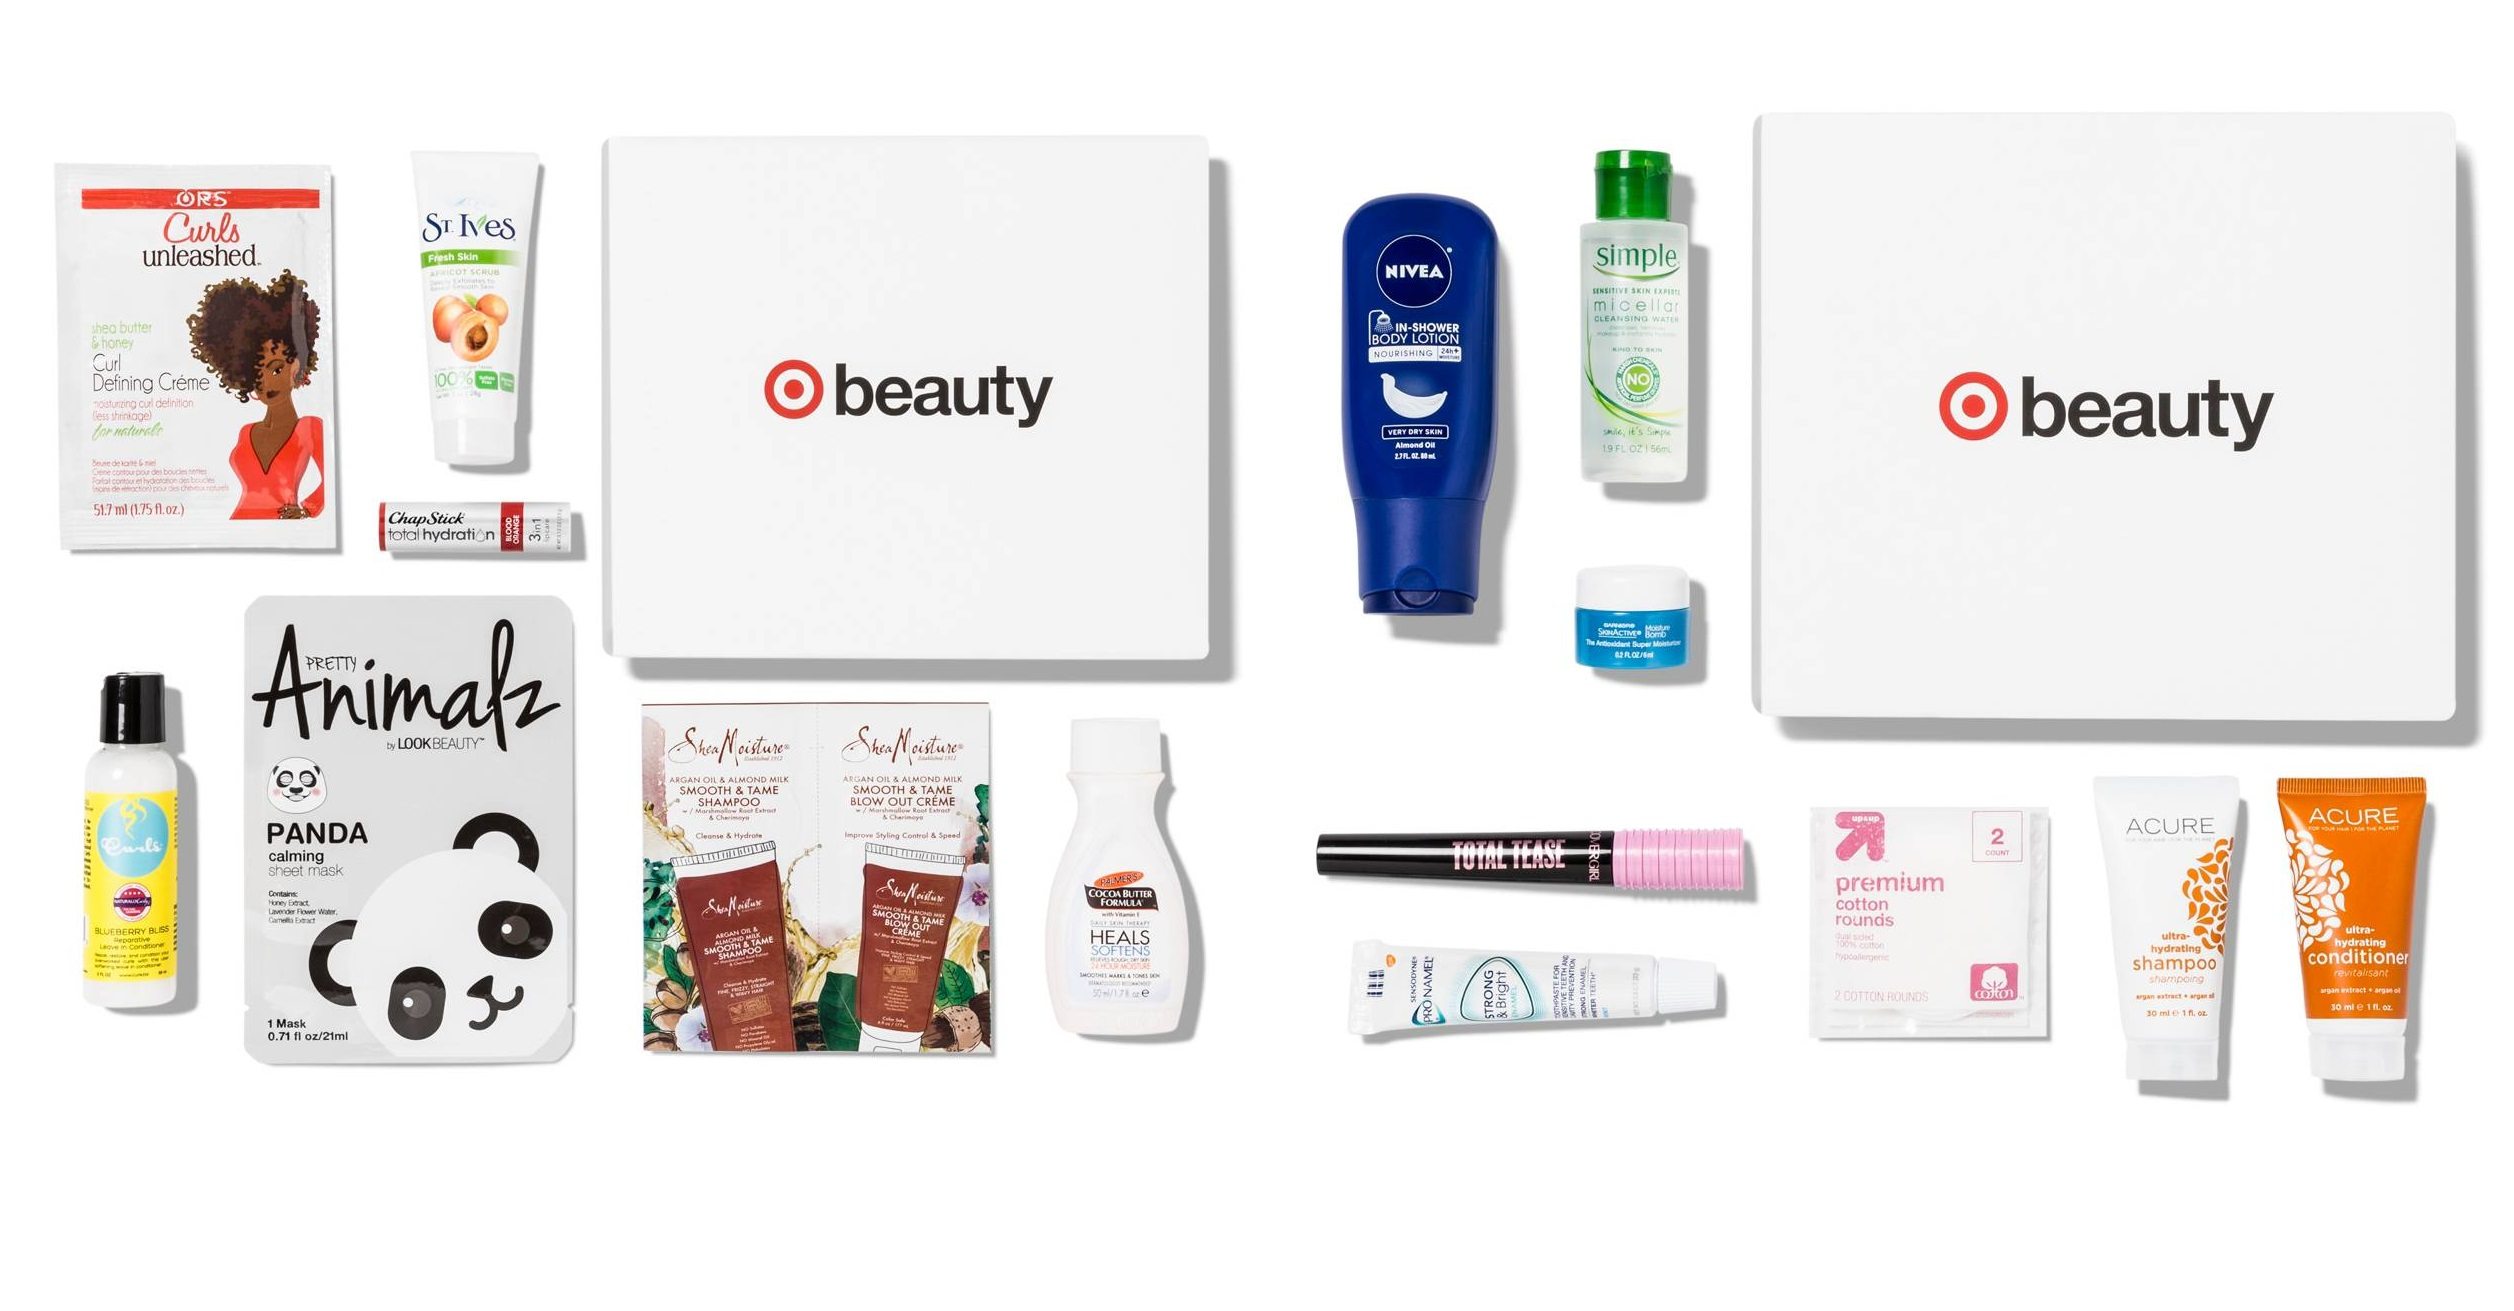 Two New Target September Beauty Boxes!! Only $7.00 Each SHIPPED!